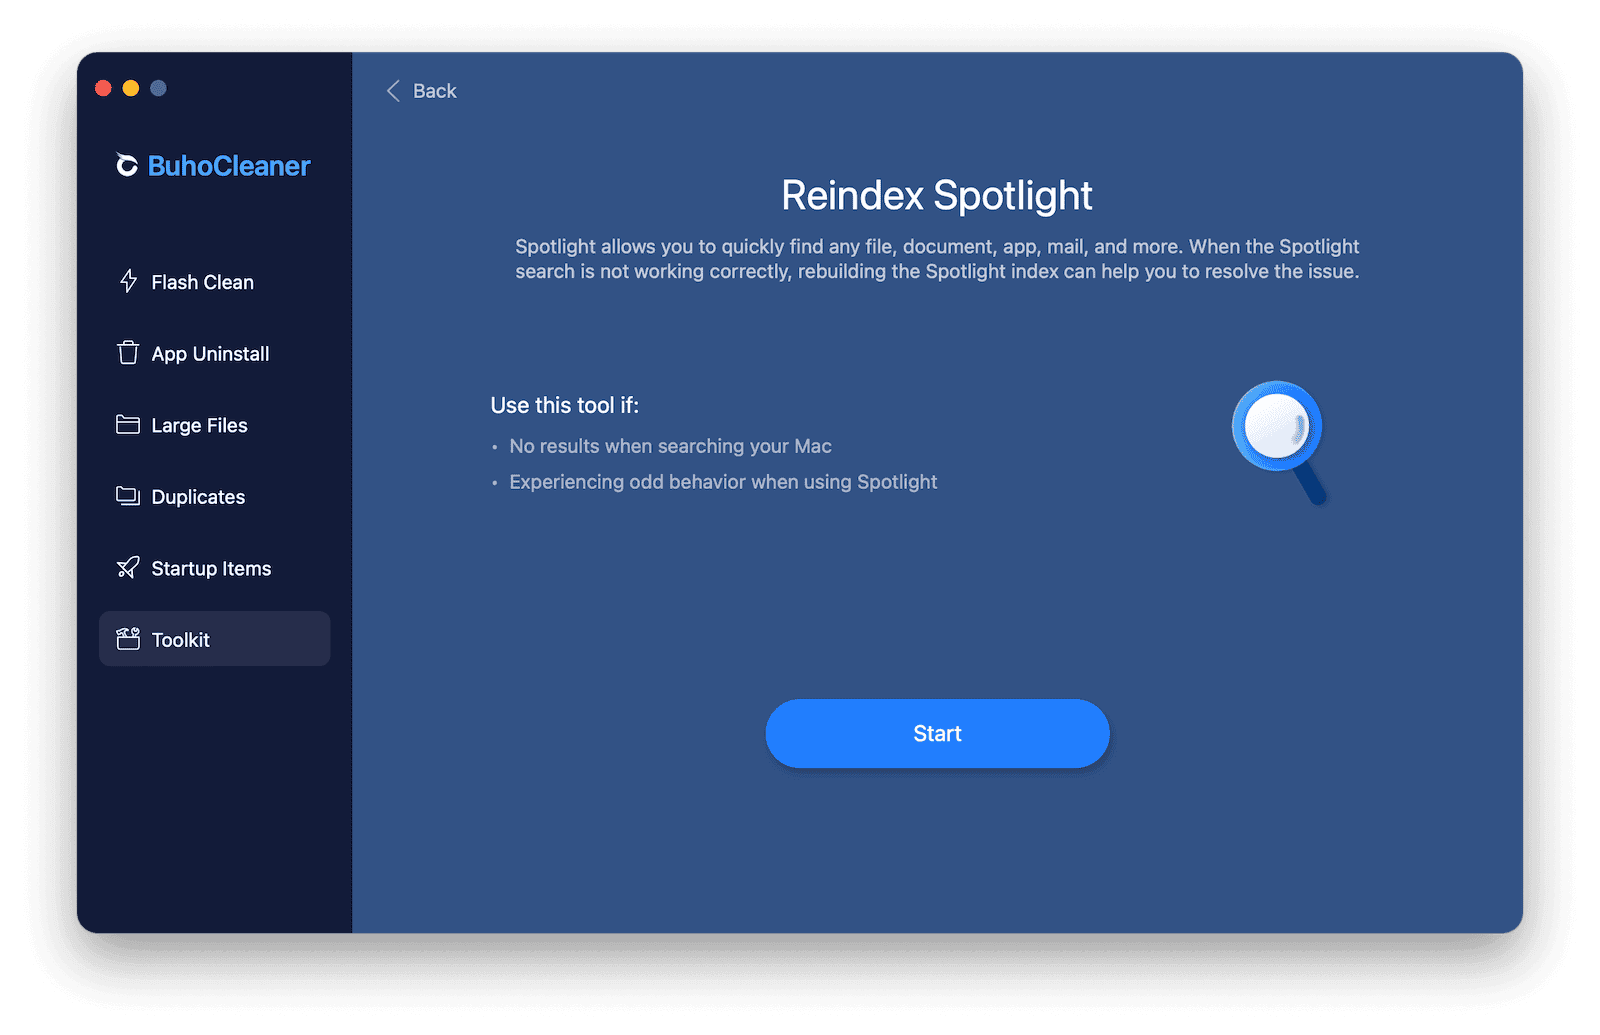 Reindex Spotlight with BuhoCleaner